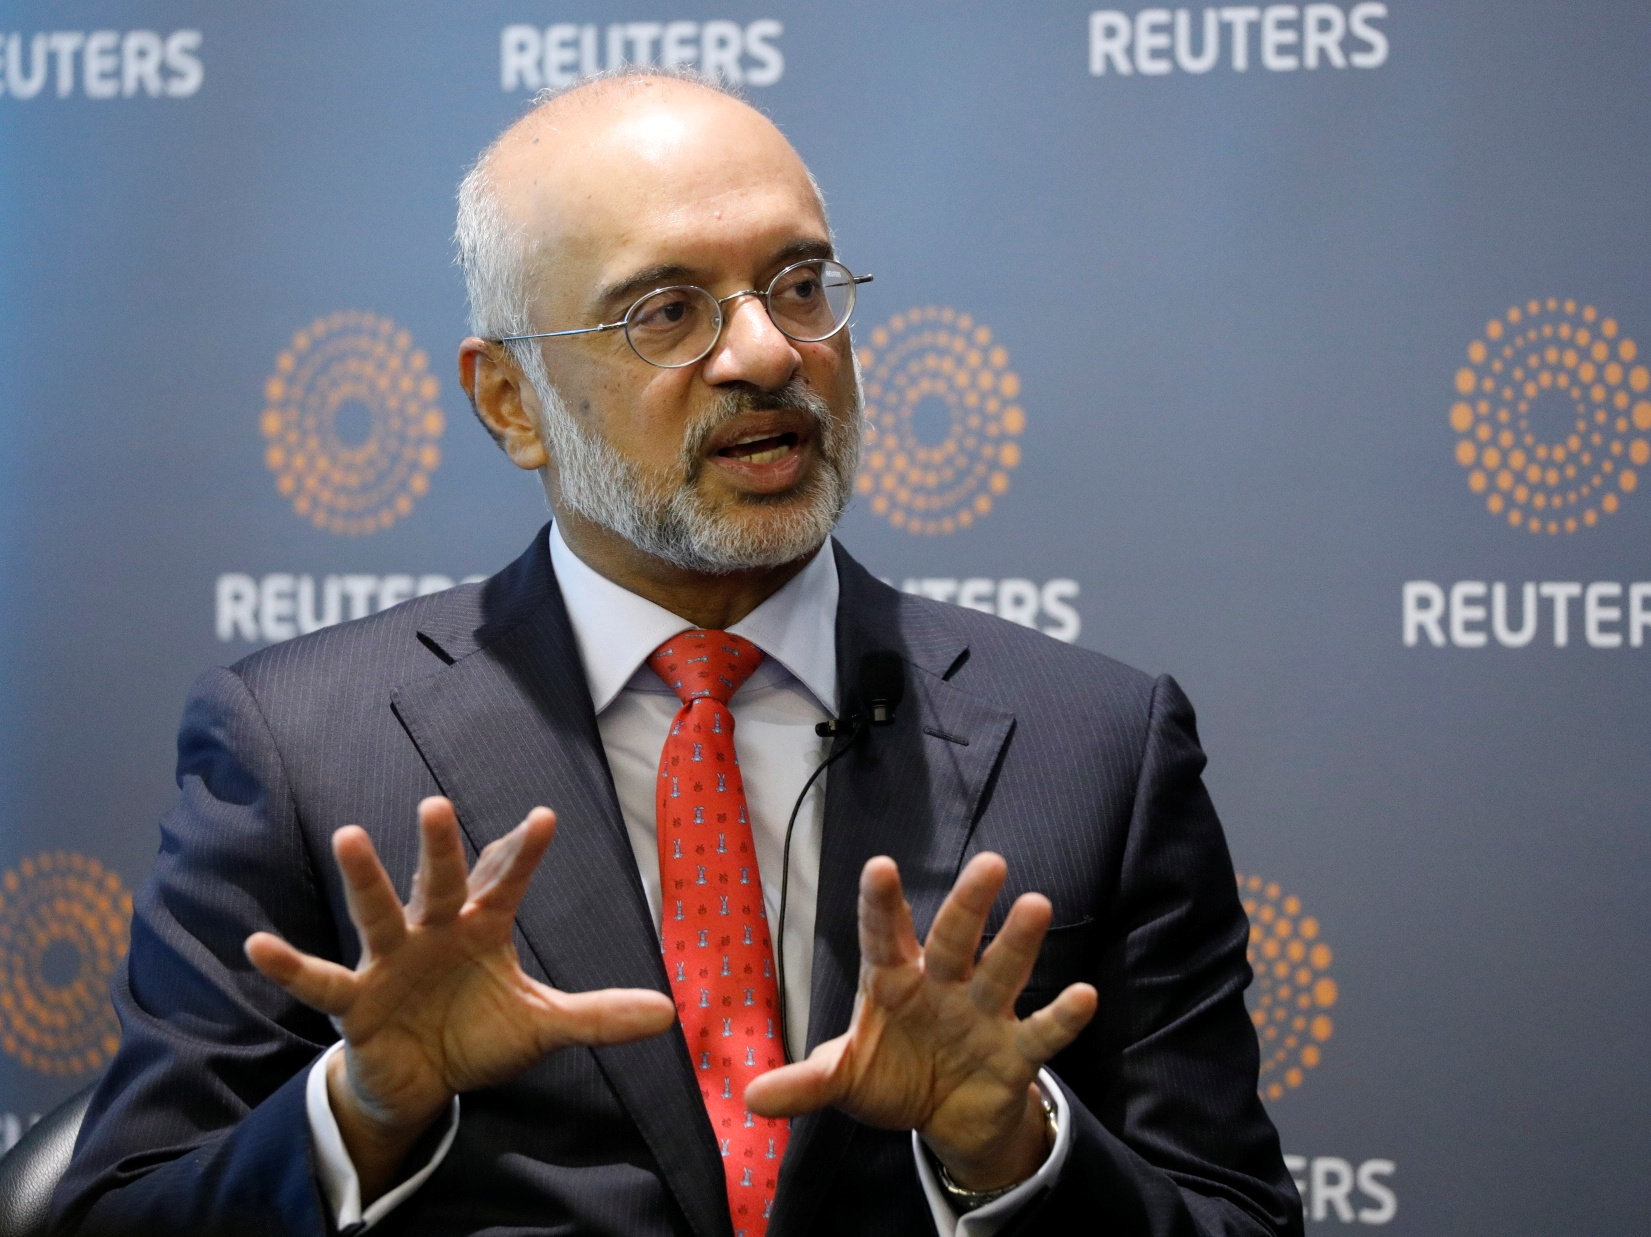 DBS CEO Piyush Gupta speaks during a Reuters Newsmaker event in Singapore